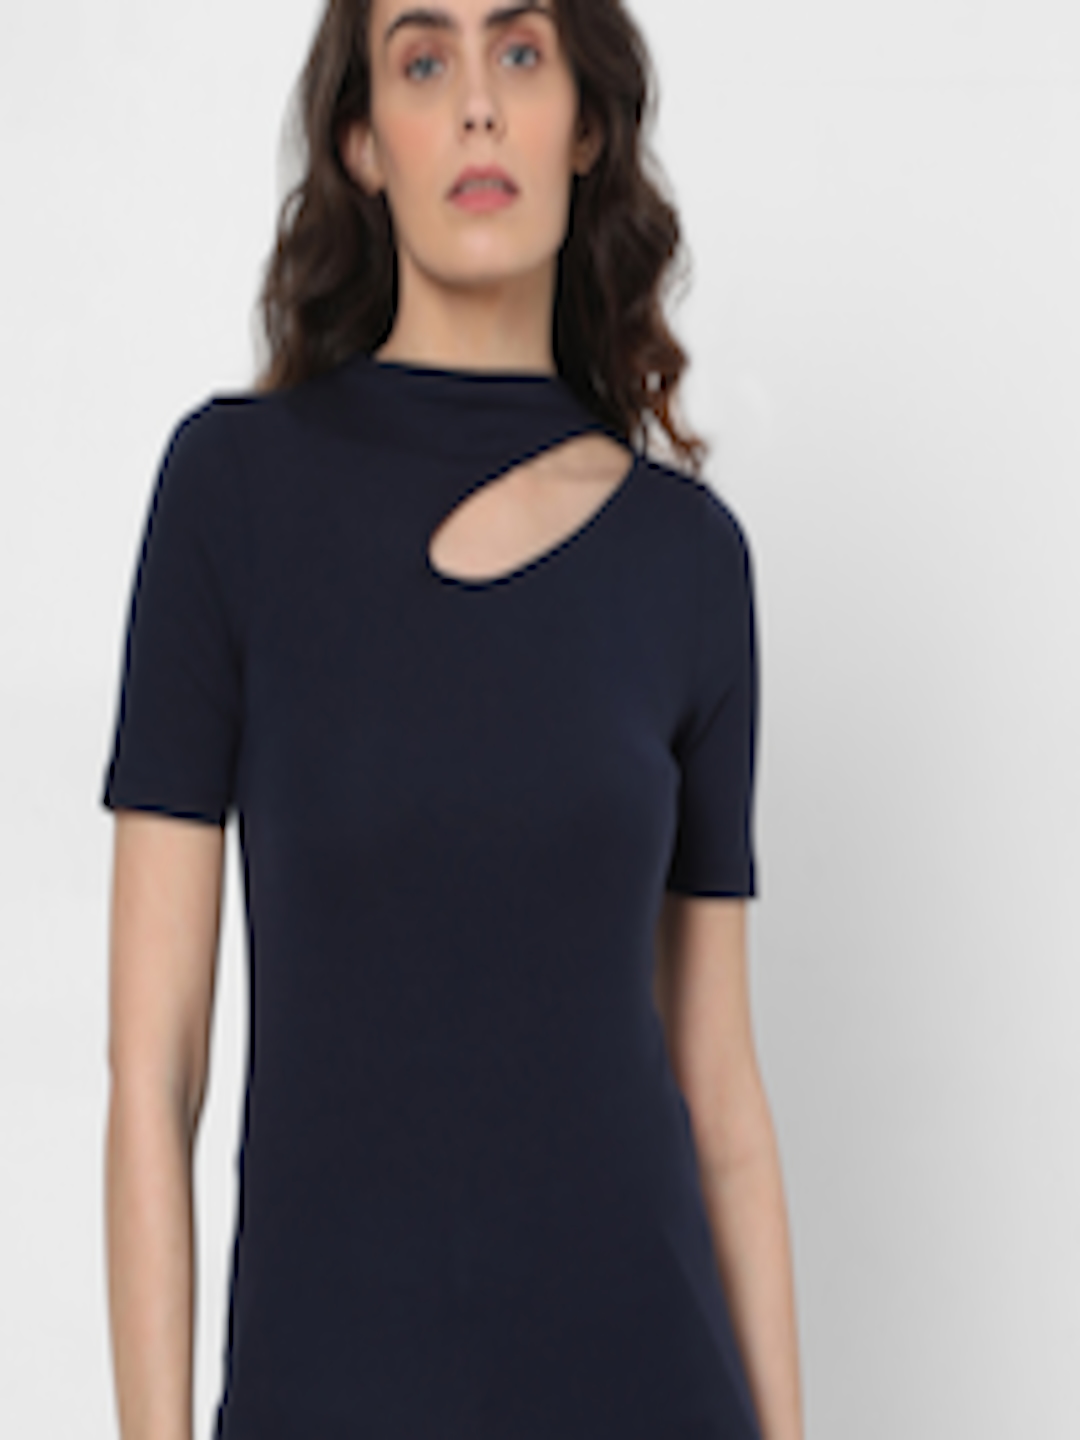 Buy Vero Moda Navy Blue Fitted Top - Tops for Women 15693094 | Myntra